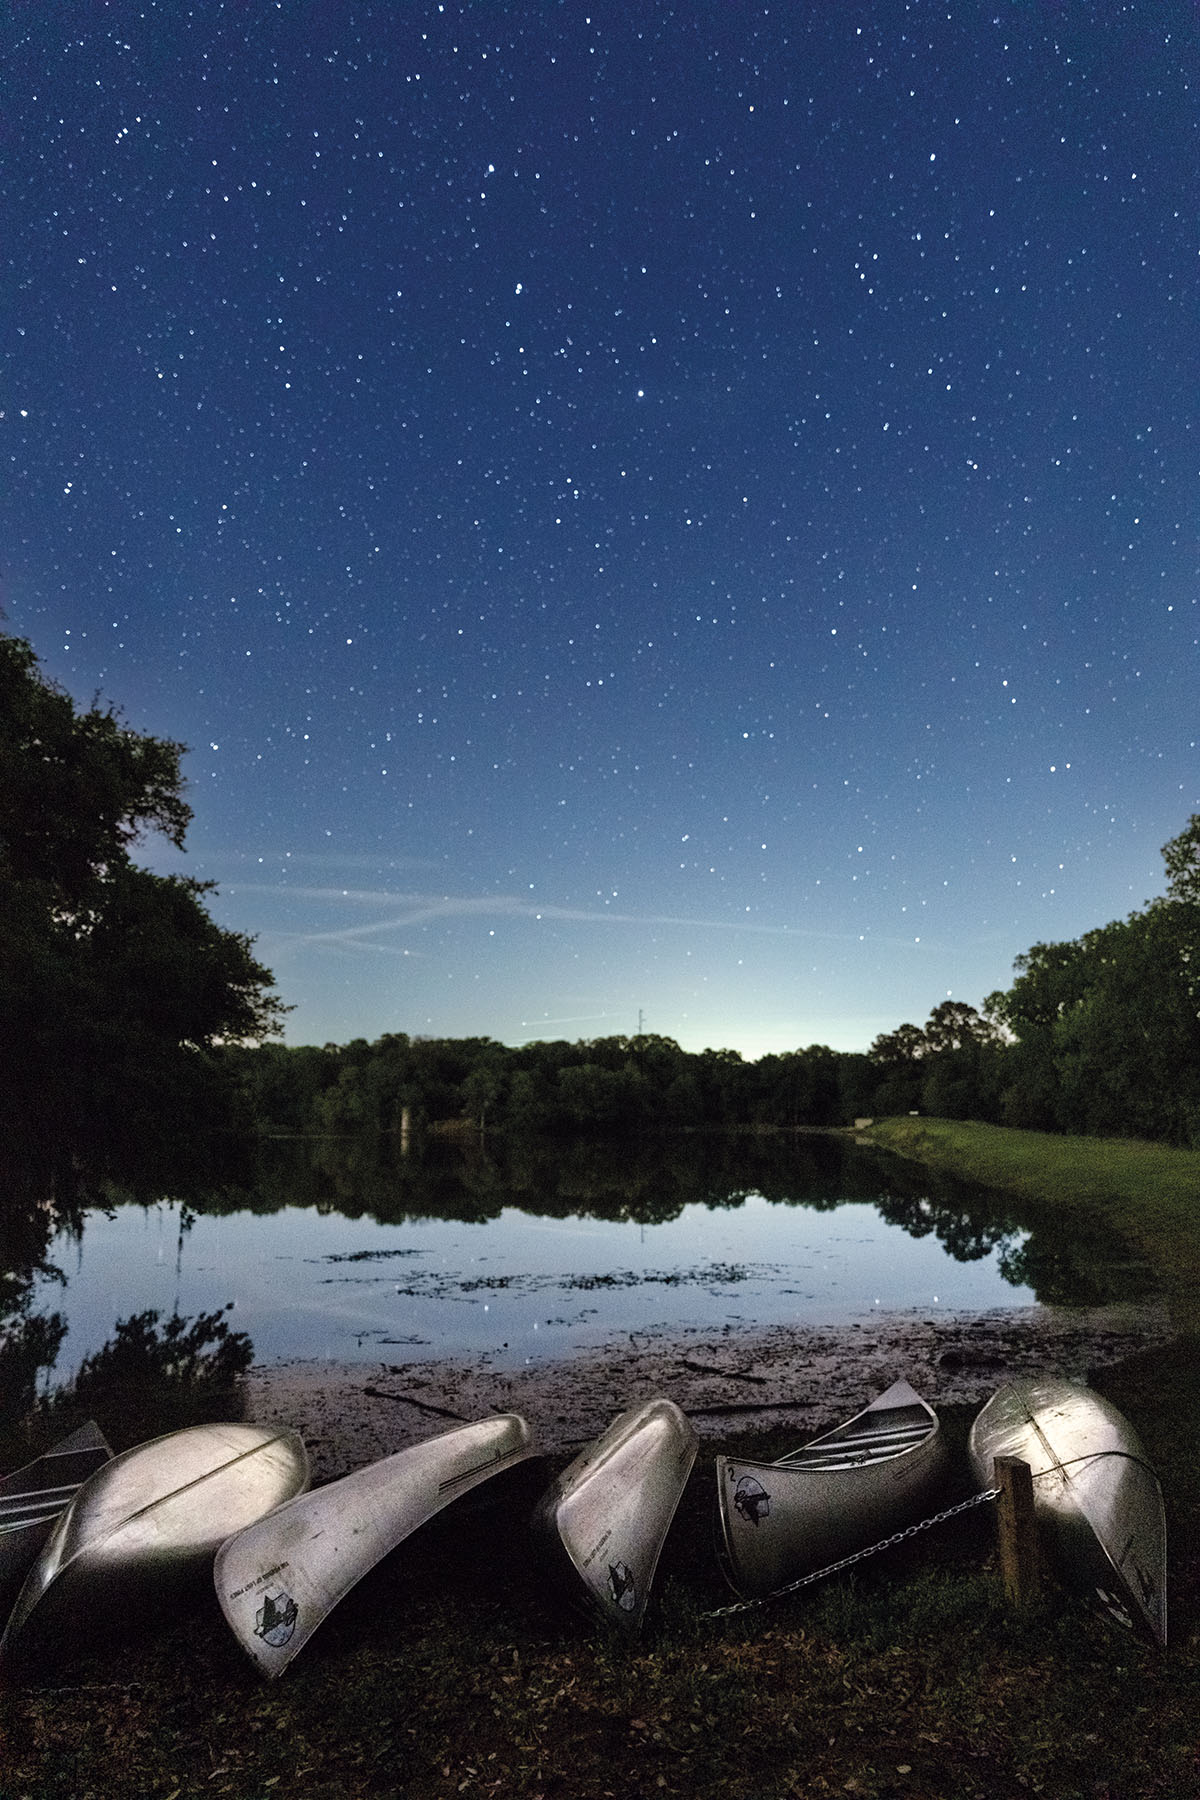 A group of five silver canoes lay on the shoreline of a still lake underneath a dark blue-black sky filled with stars